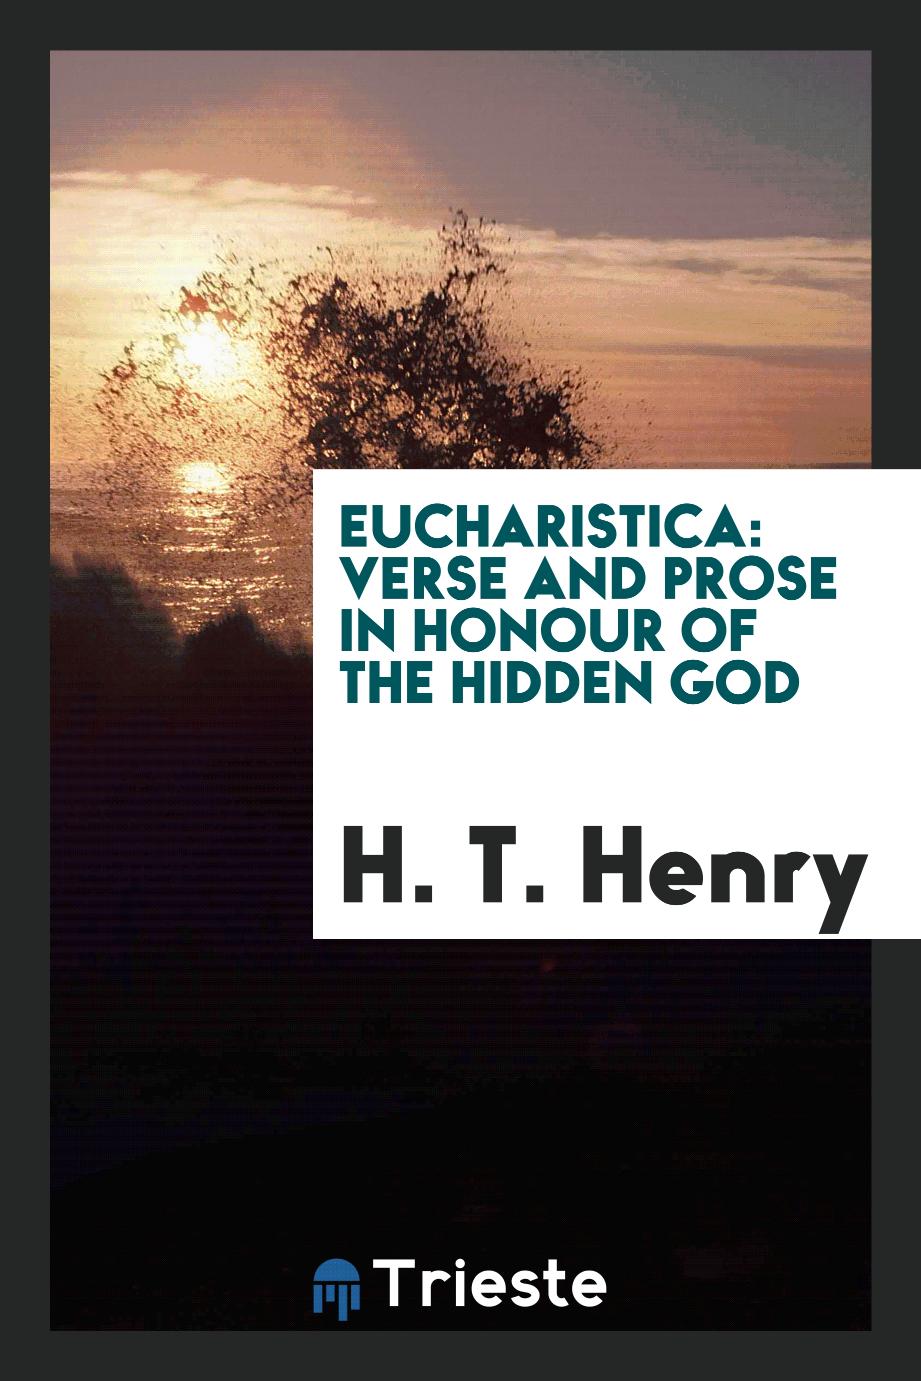 Eucharistica: verse and prose in honour of the Hidden God